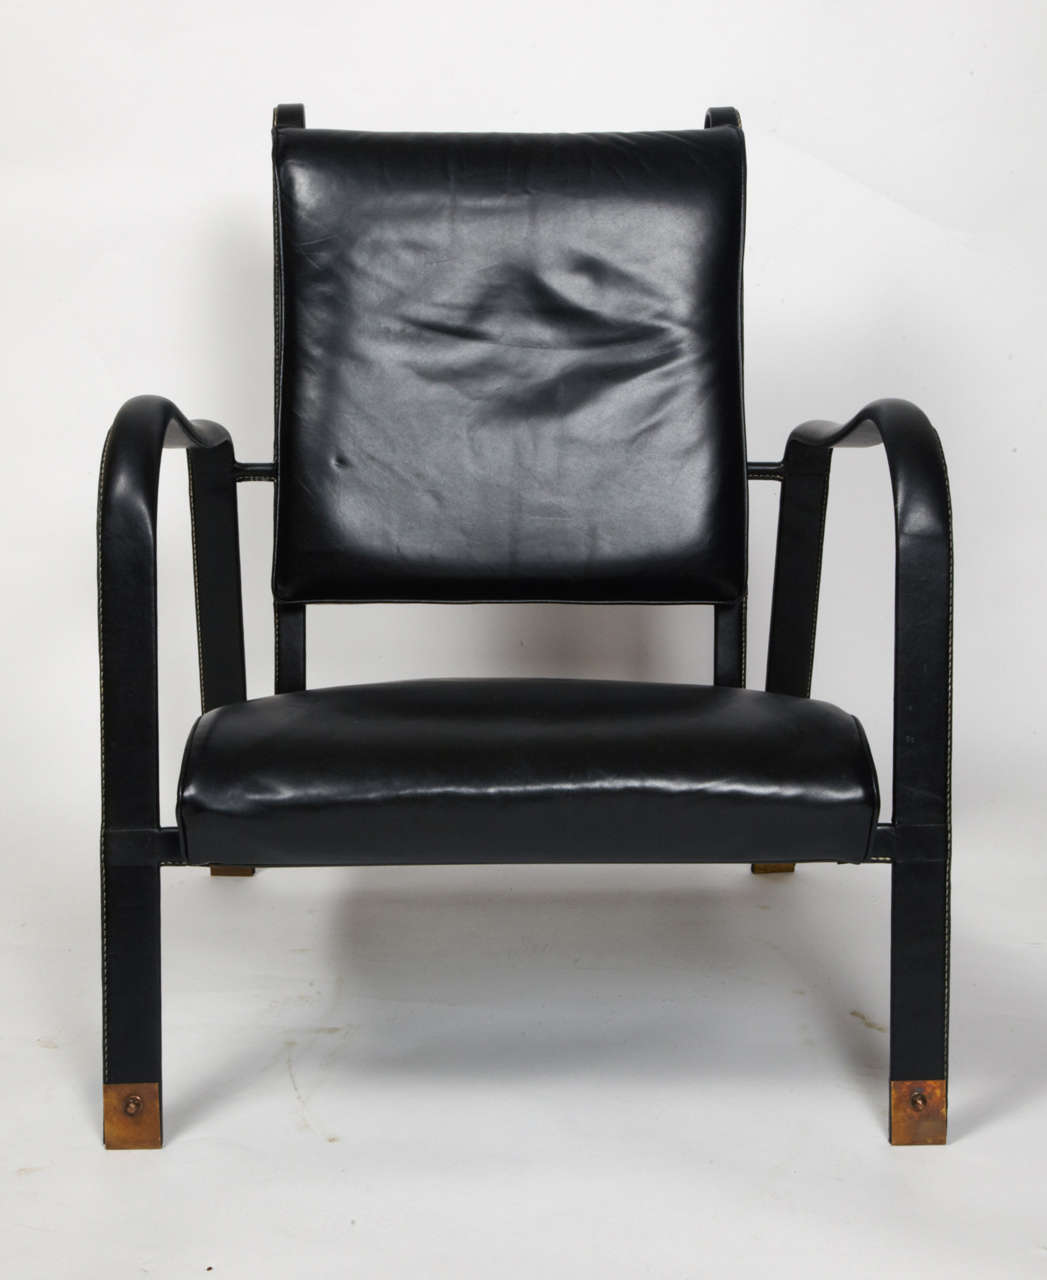 Stitched leather armchairs